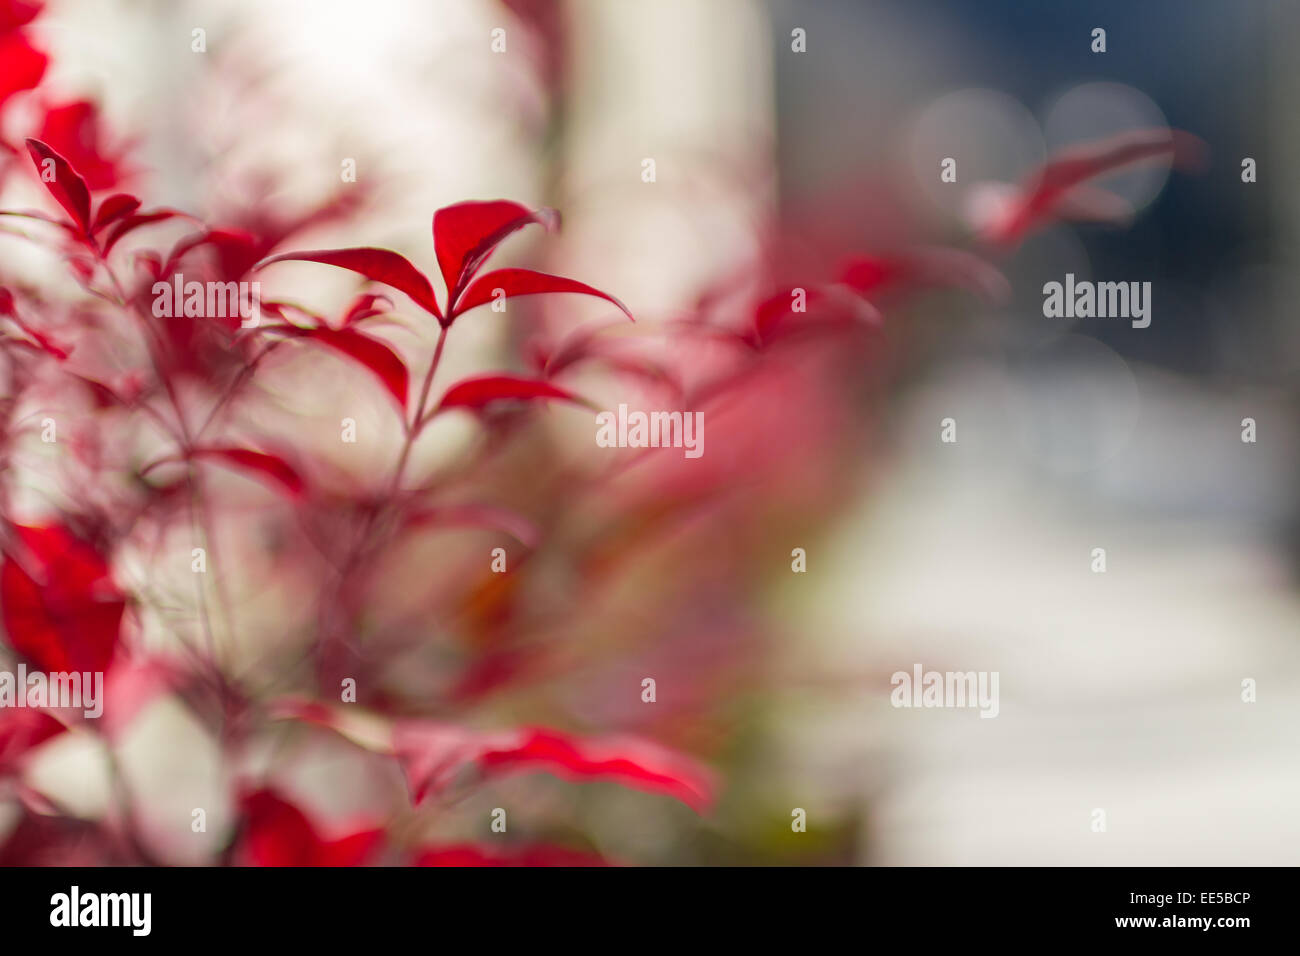 Extreme close-up of a decorative plant red. Stock Photo